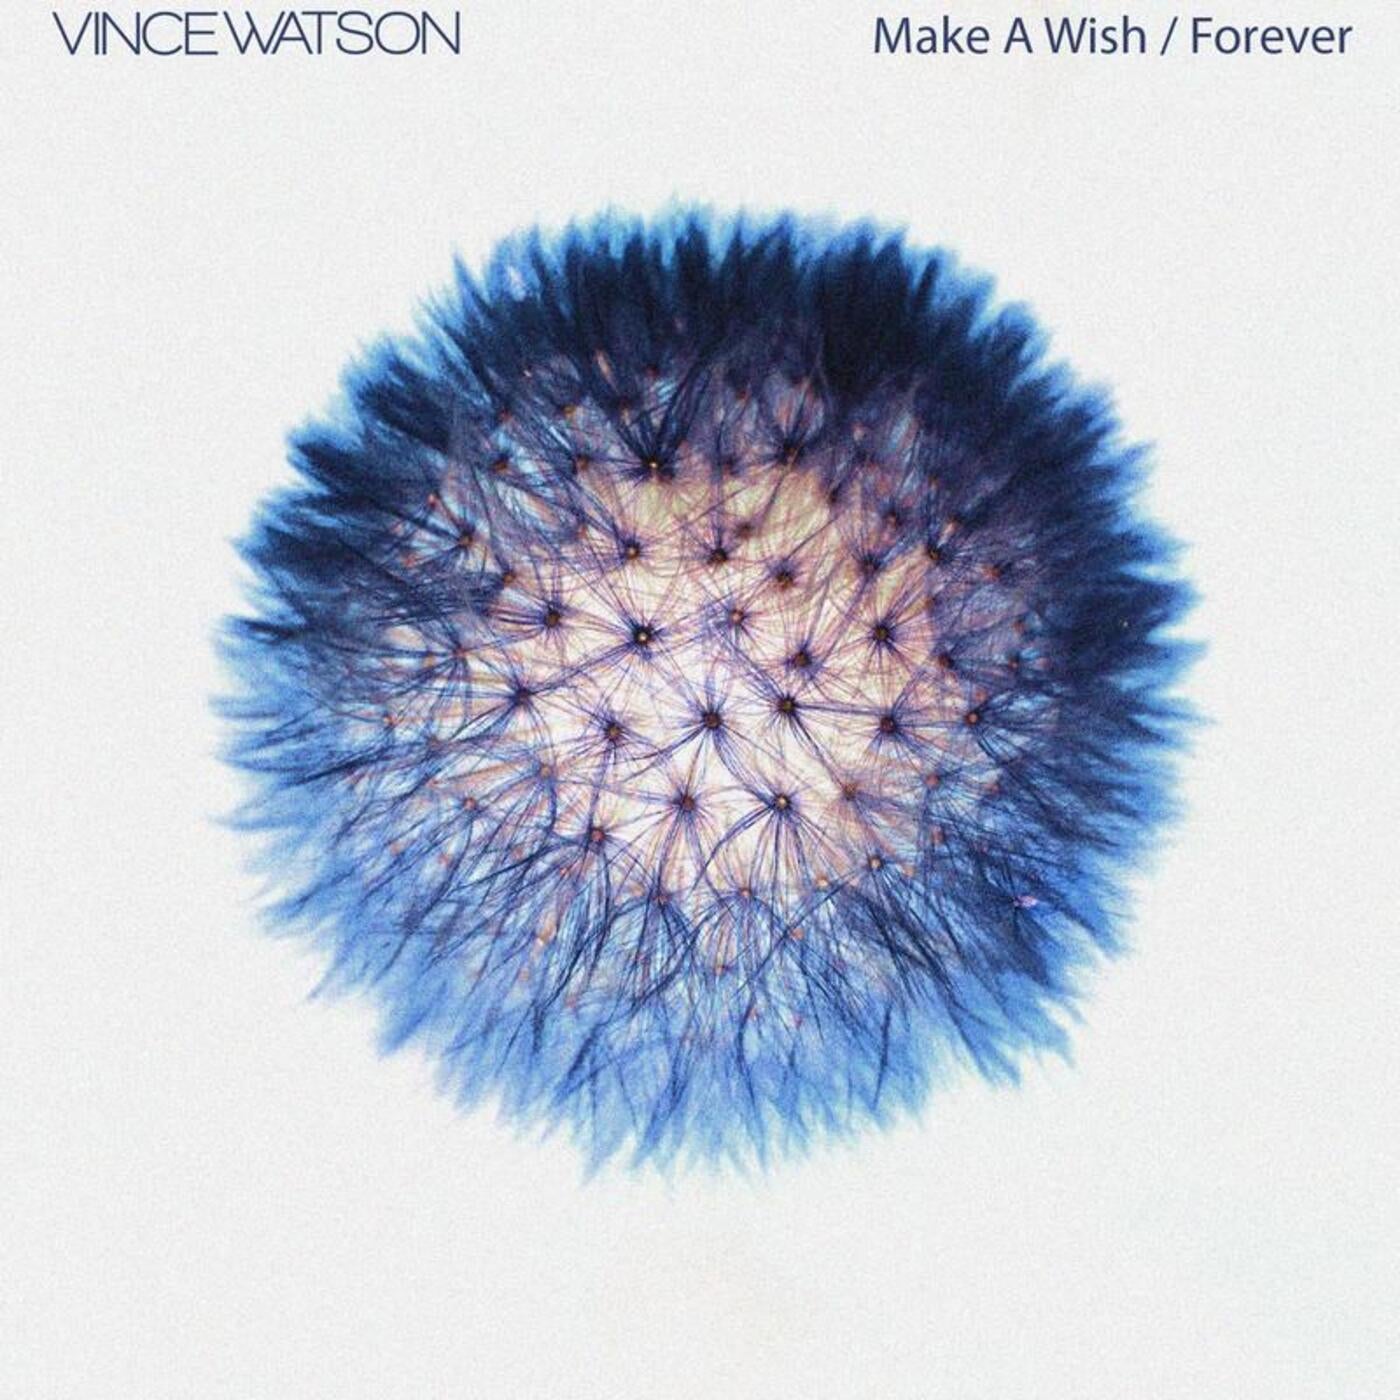 image cover: Vince Watson - Make a Wish / Forever / ESOL018